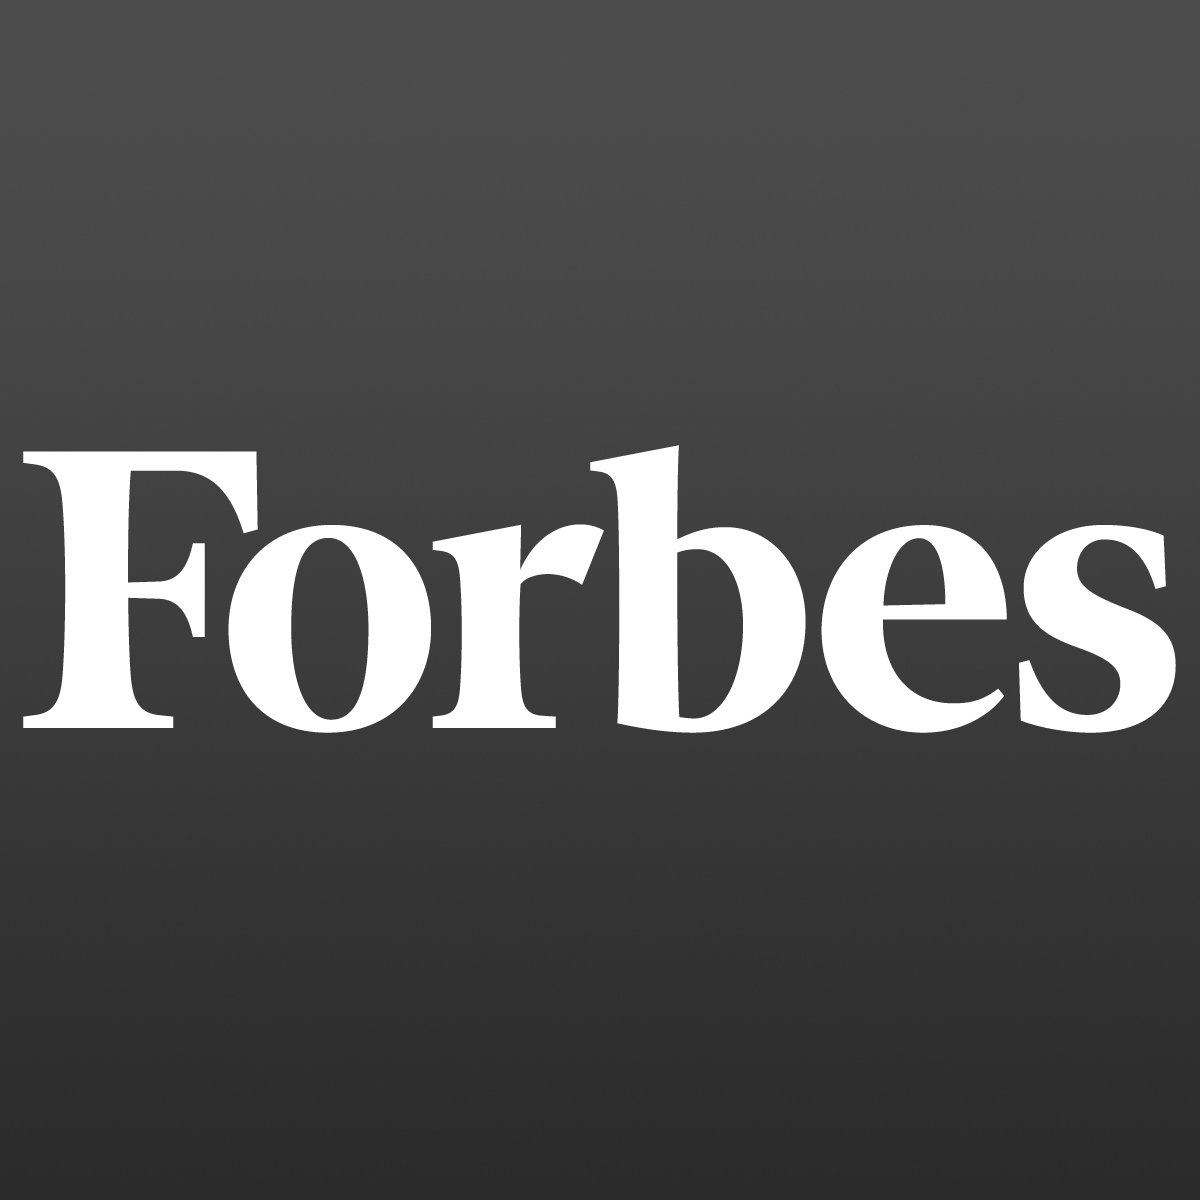 Forbes Covers VillageMD's Acquisition of Summit Medical Group Arizona